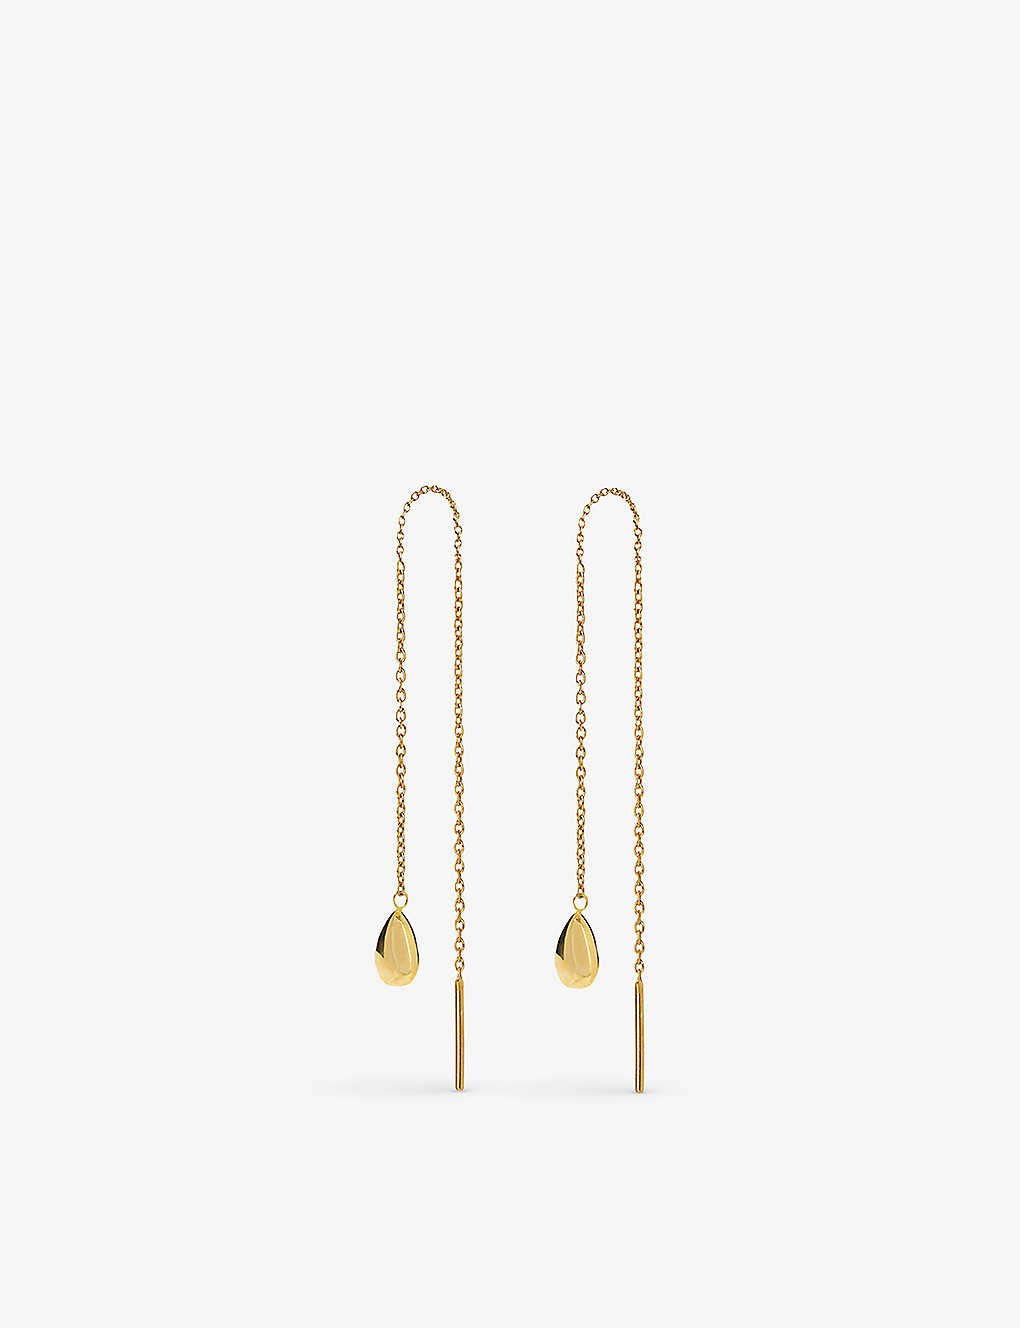 The Alkemistry Womens Yellow Gold Vianna 18ct Yellow-gold Chain Threader Earrings